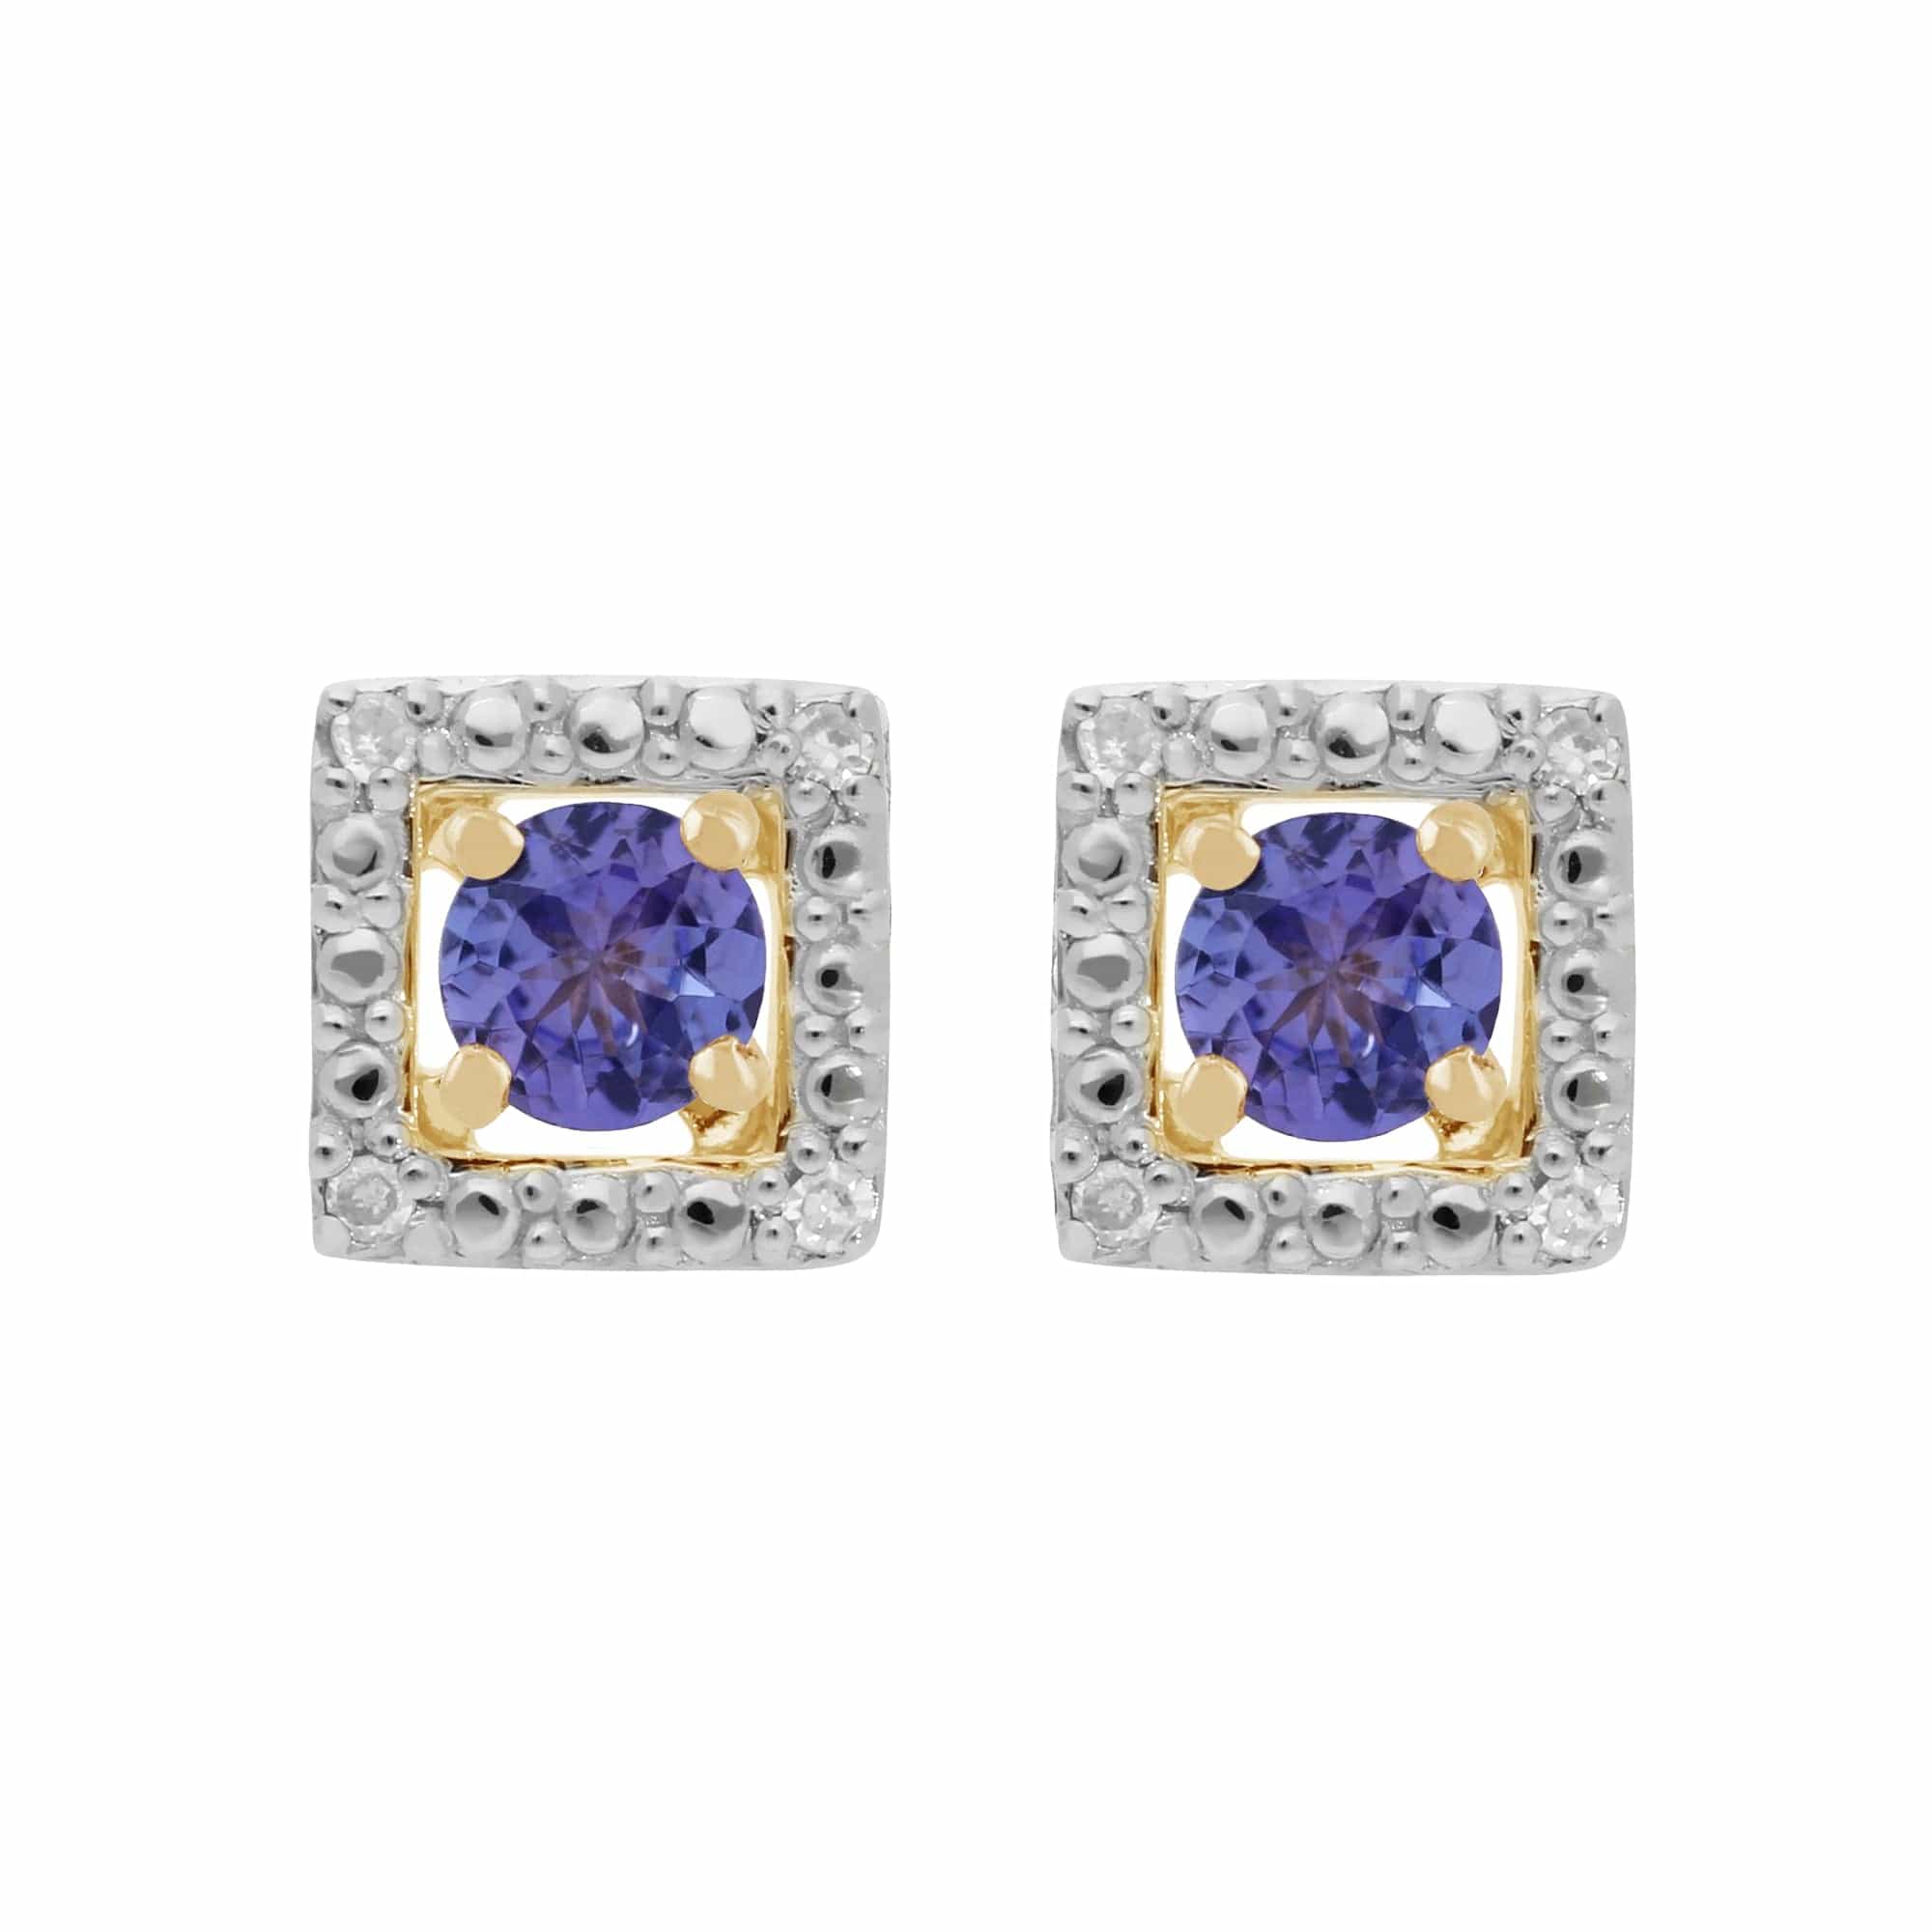 11557-191E0379019 Classic Round Tanzanite Stud Earrings with Detachable Diamond Square Earrings Jacket Set in 9ct Yellow Gold 1